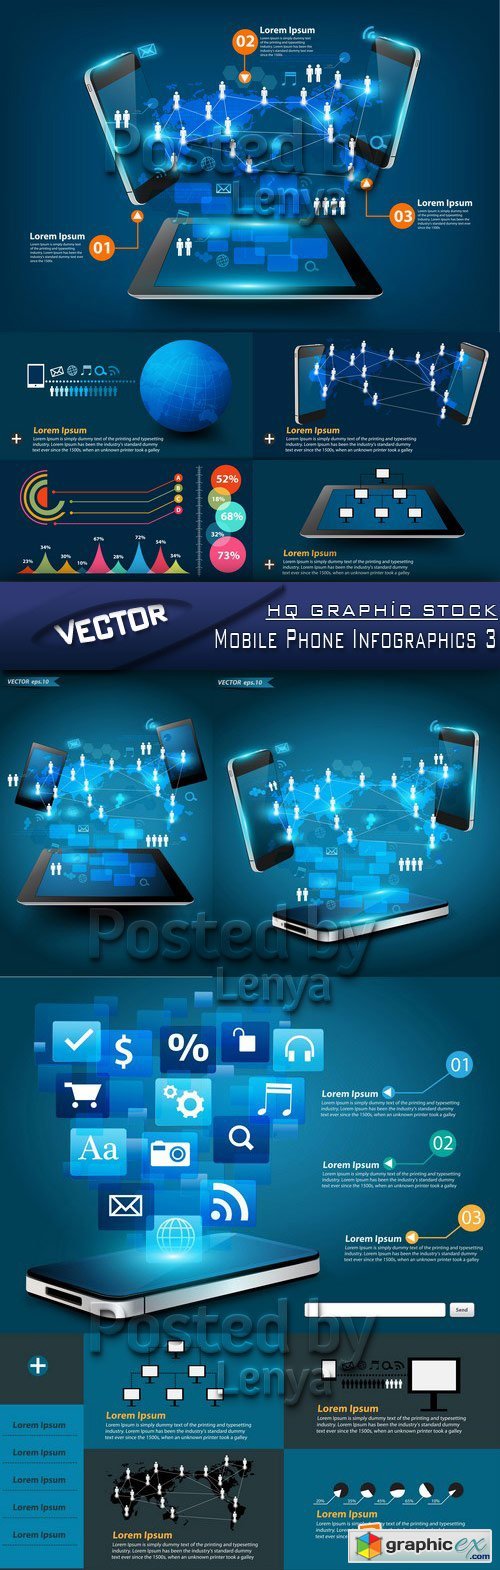 Stock Vector - Mobile Phone Infographics 3